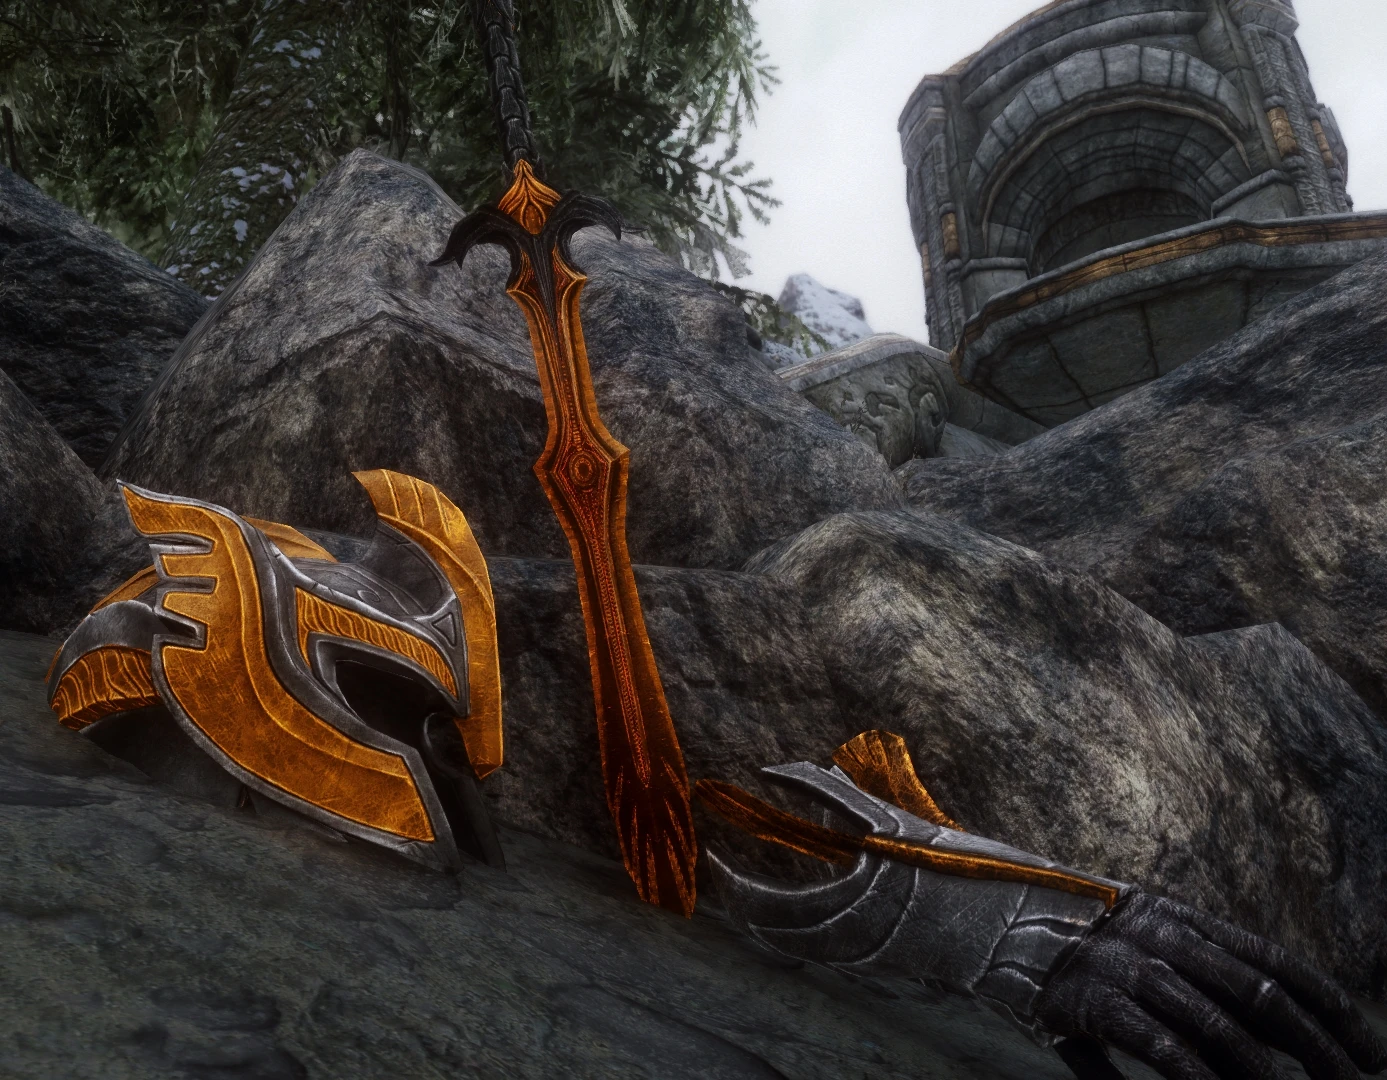 creation club skyrim expanded crossbows modpiracy